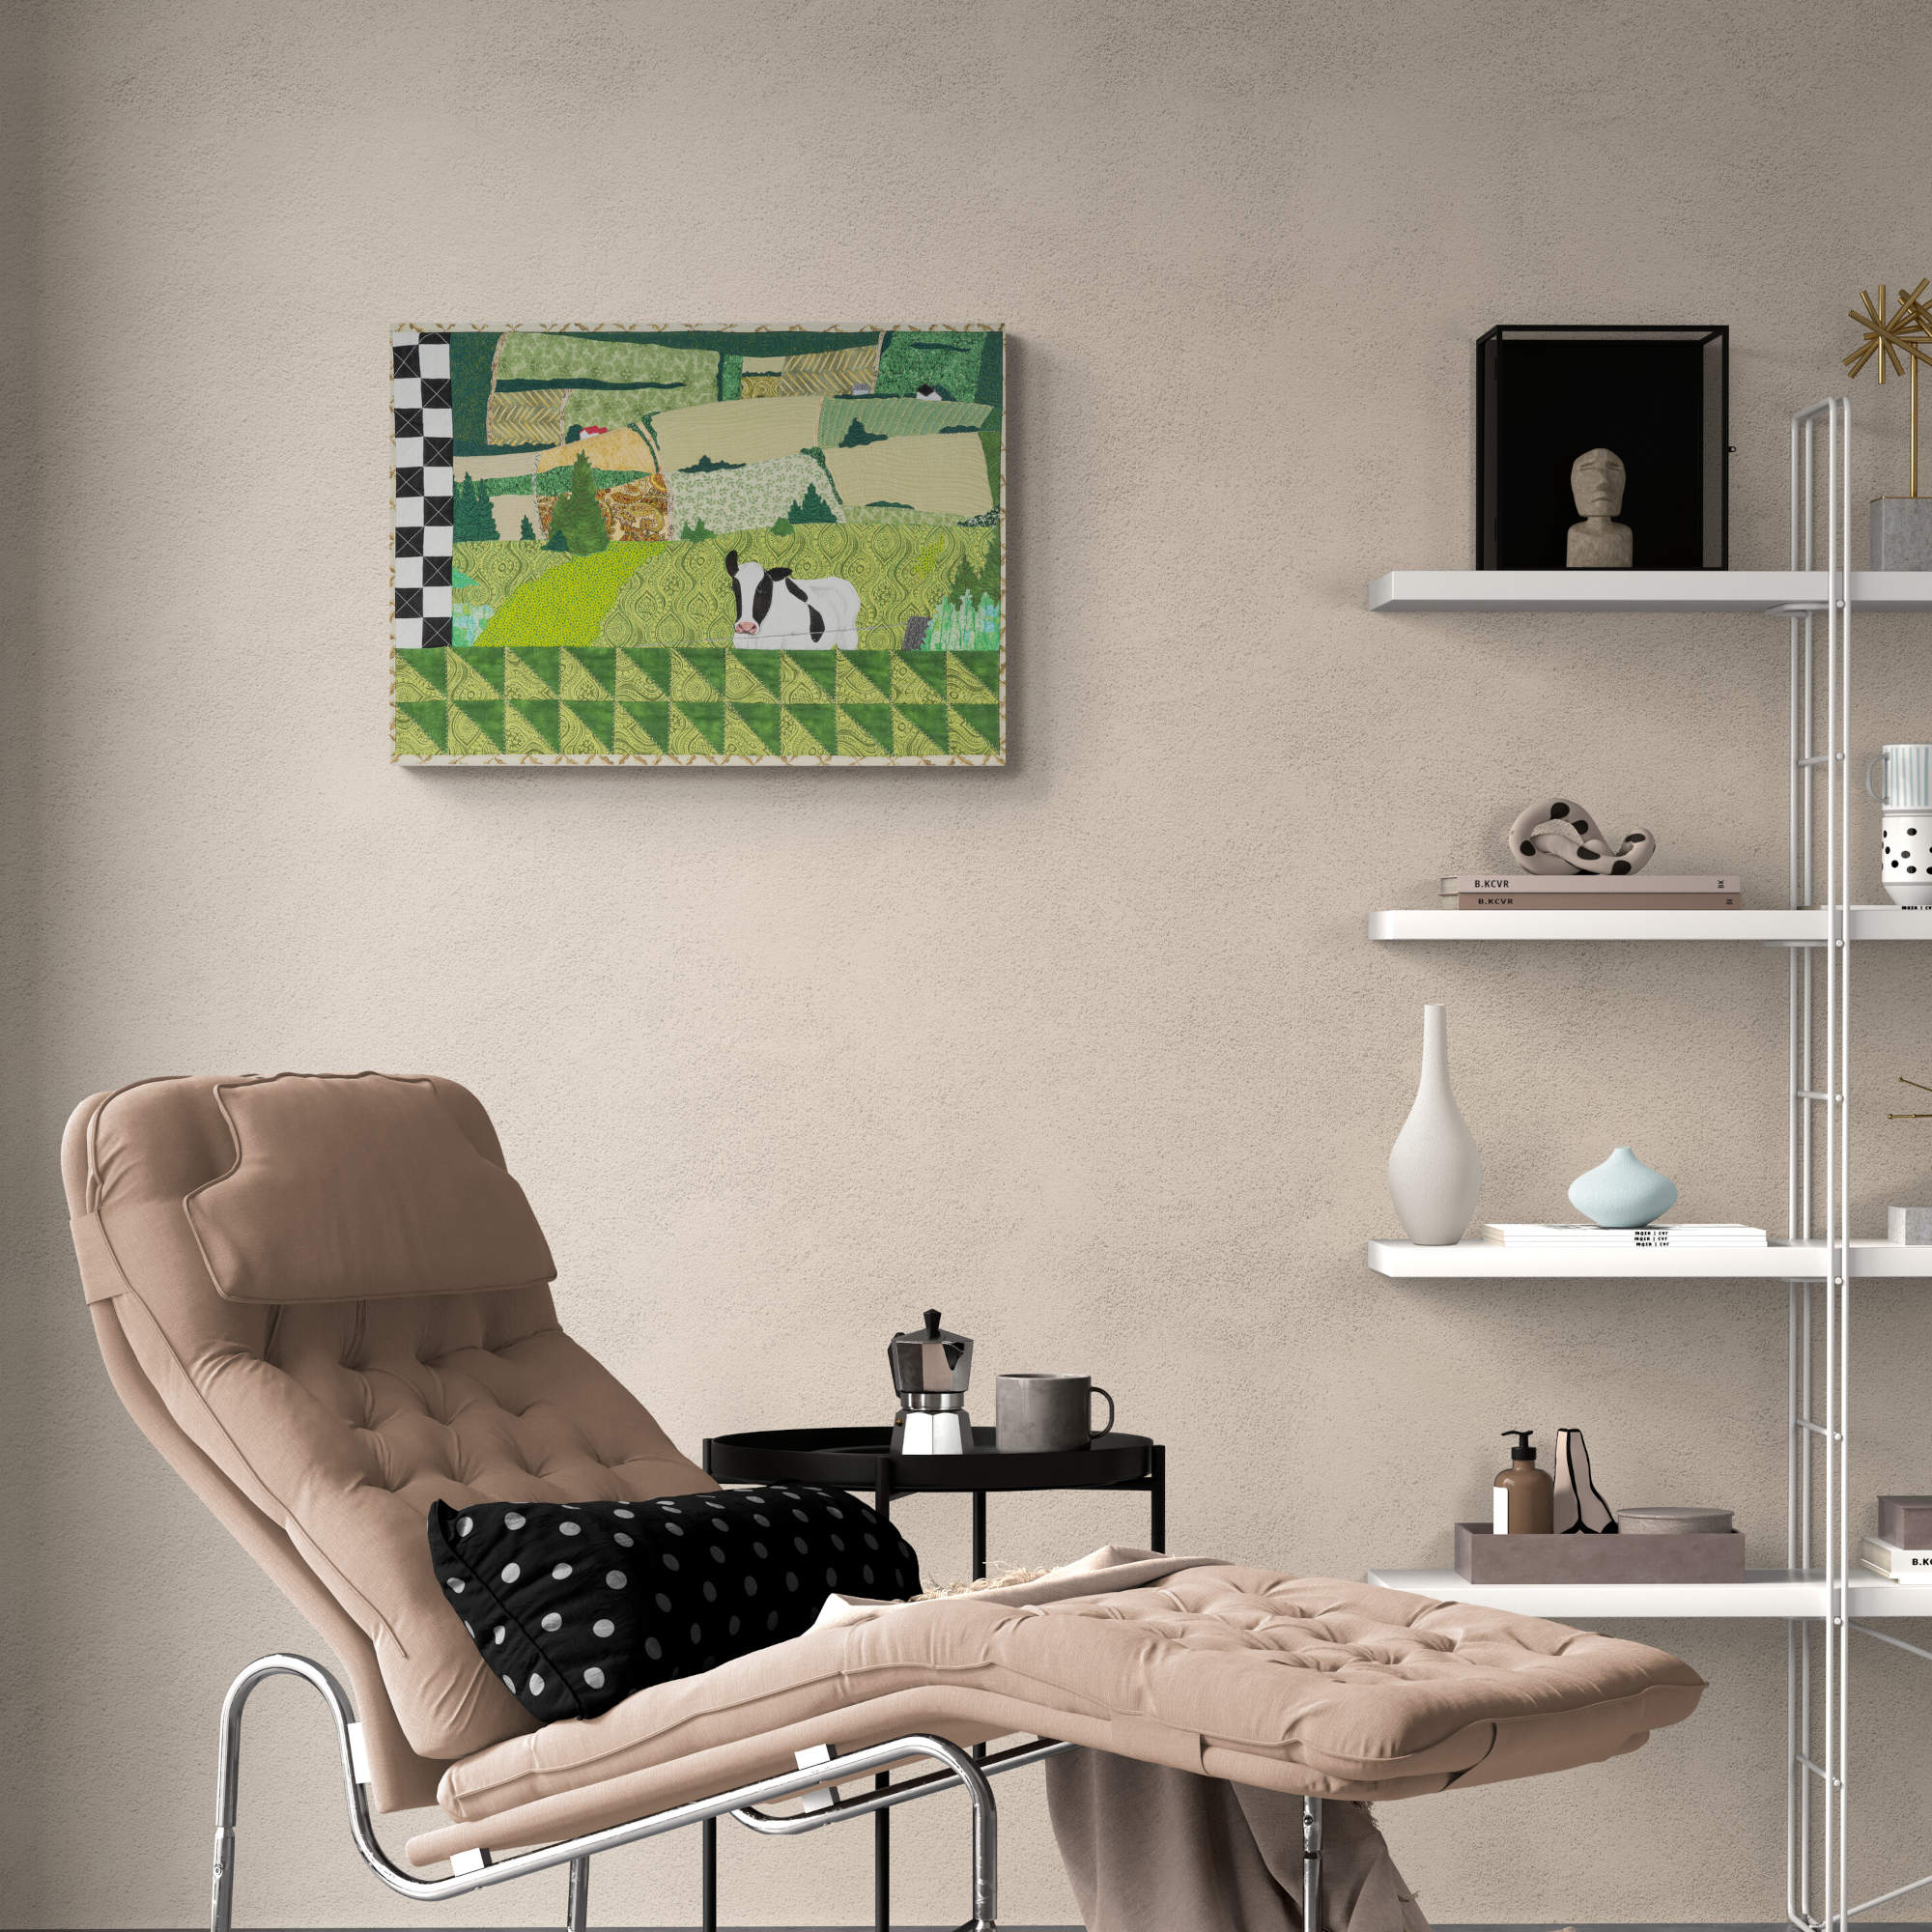 Textile artwork Le 3e rang on an off-white wall above a lounge chair and beside a shelf.